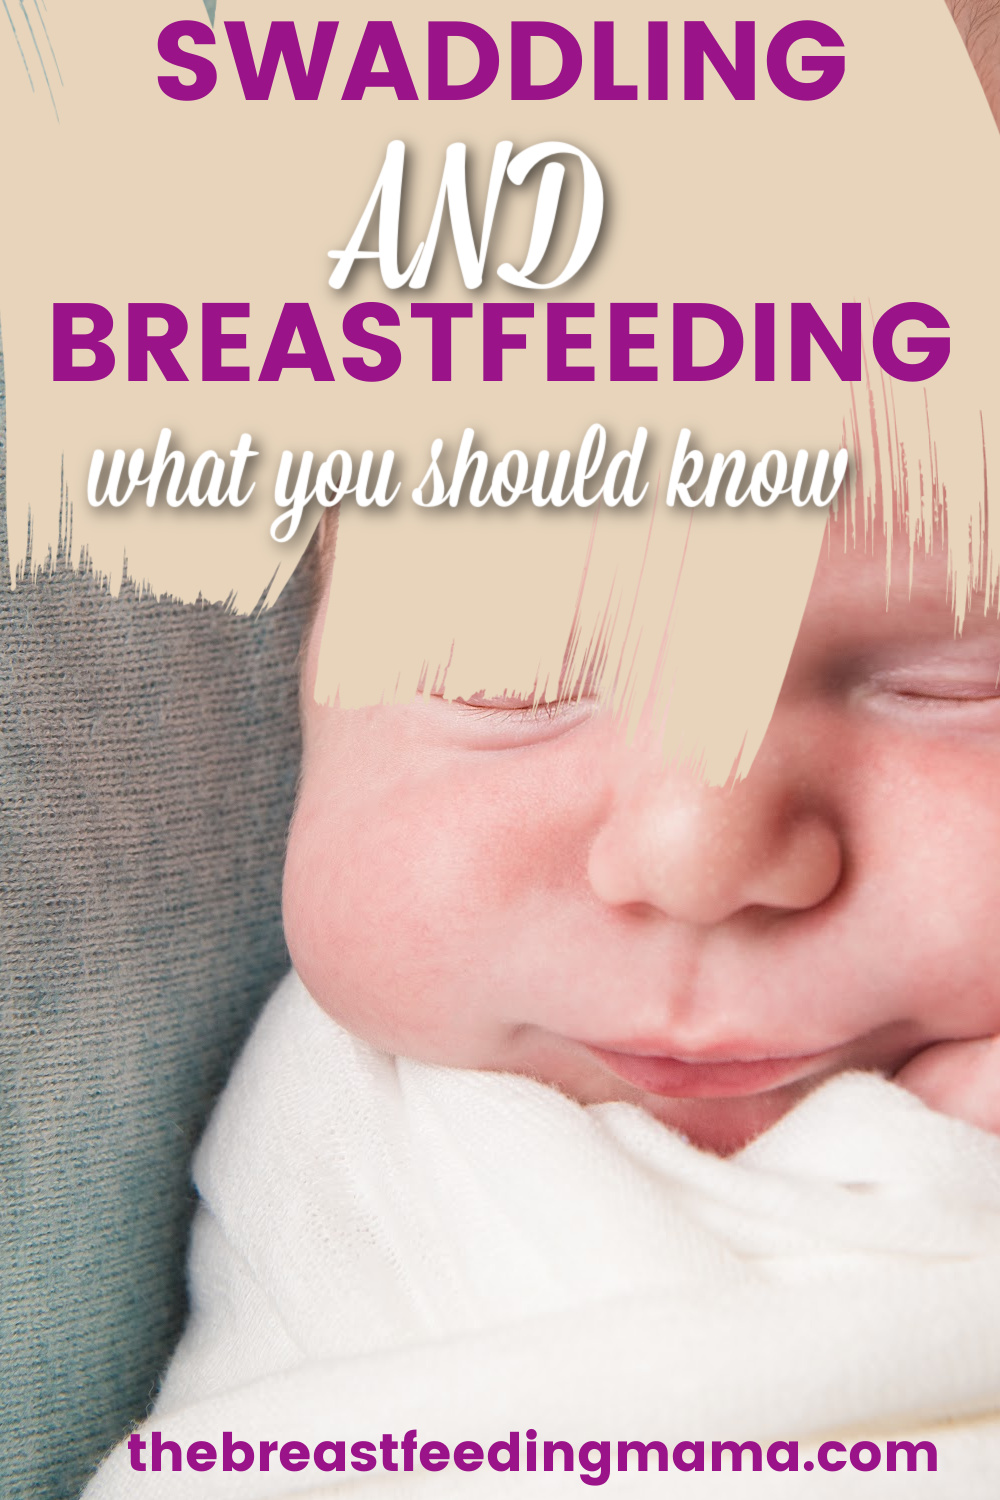 Do you like to swaddle your baby? If you do, have you ever wondered if it's safe or recommended to breastfeed while swaddled? Keep reading to learn more about breastfeeding while swaddled and get some tips on how to make it work for both you and your baby.